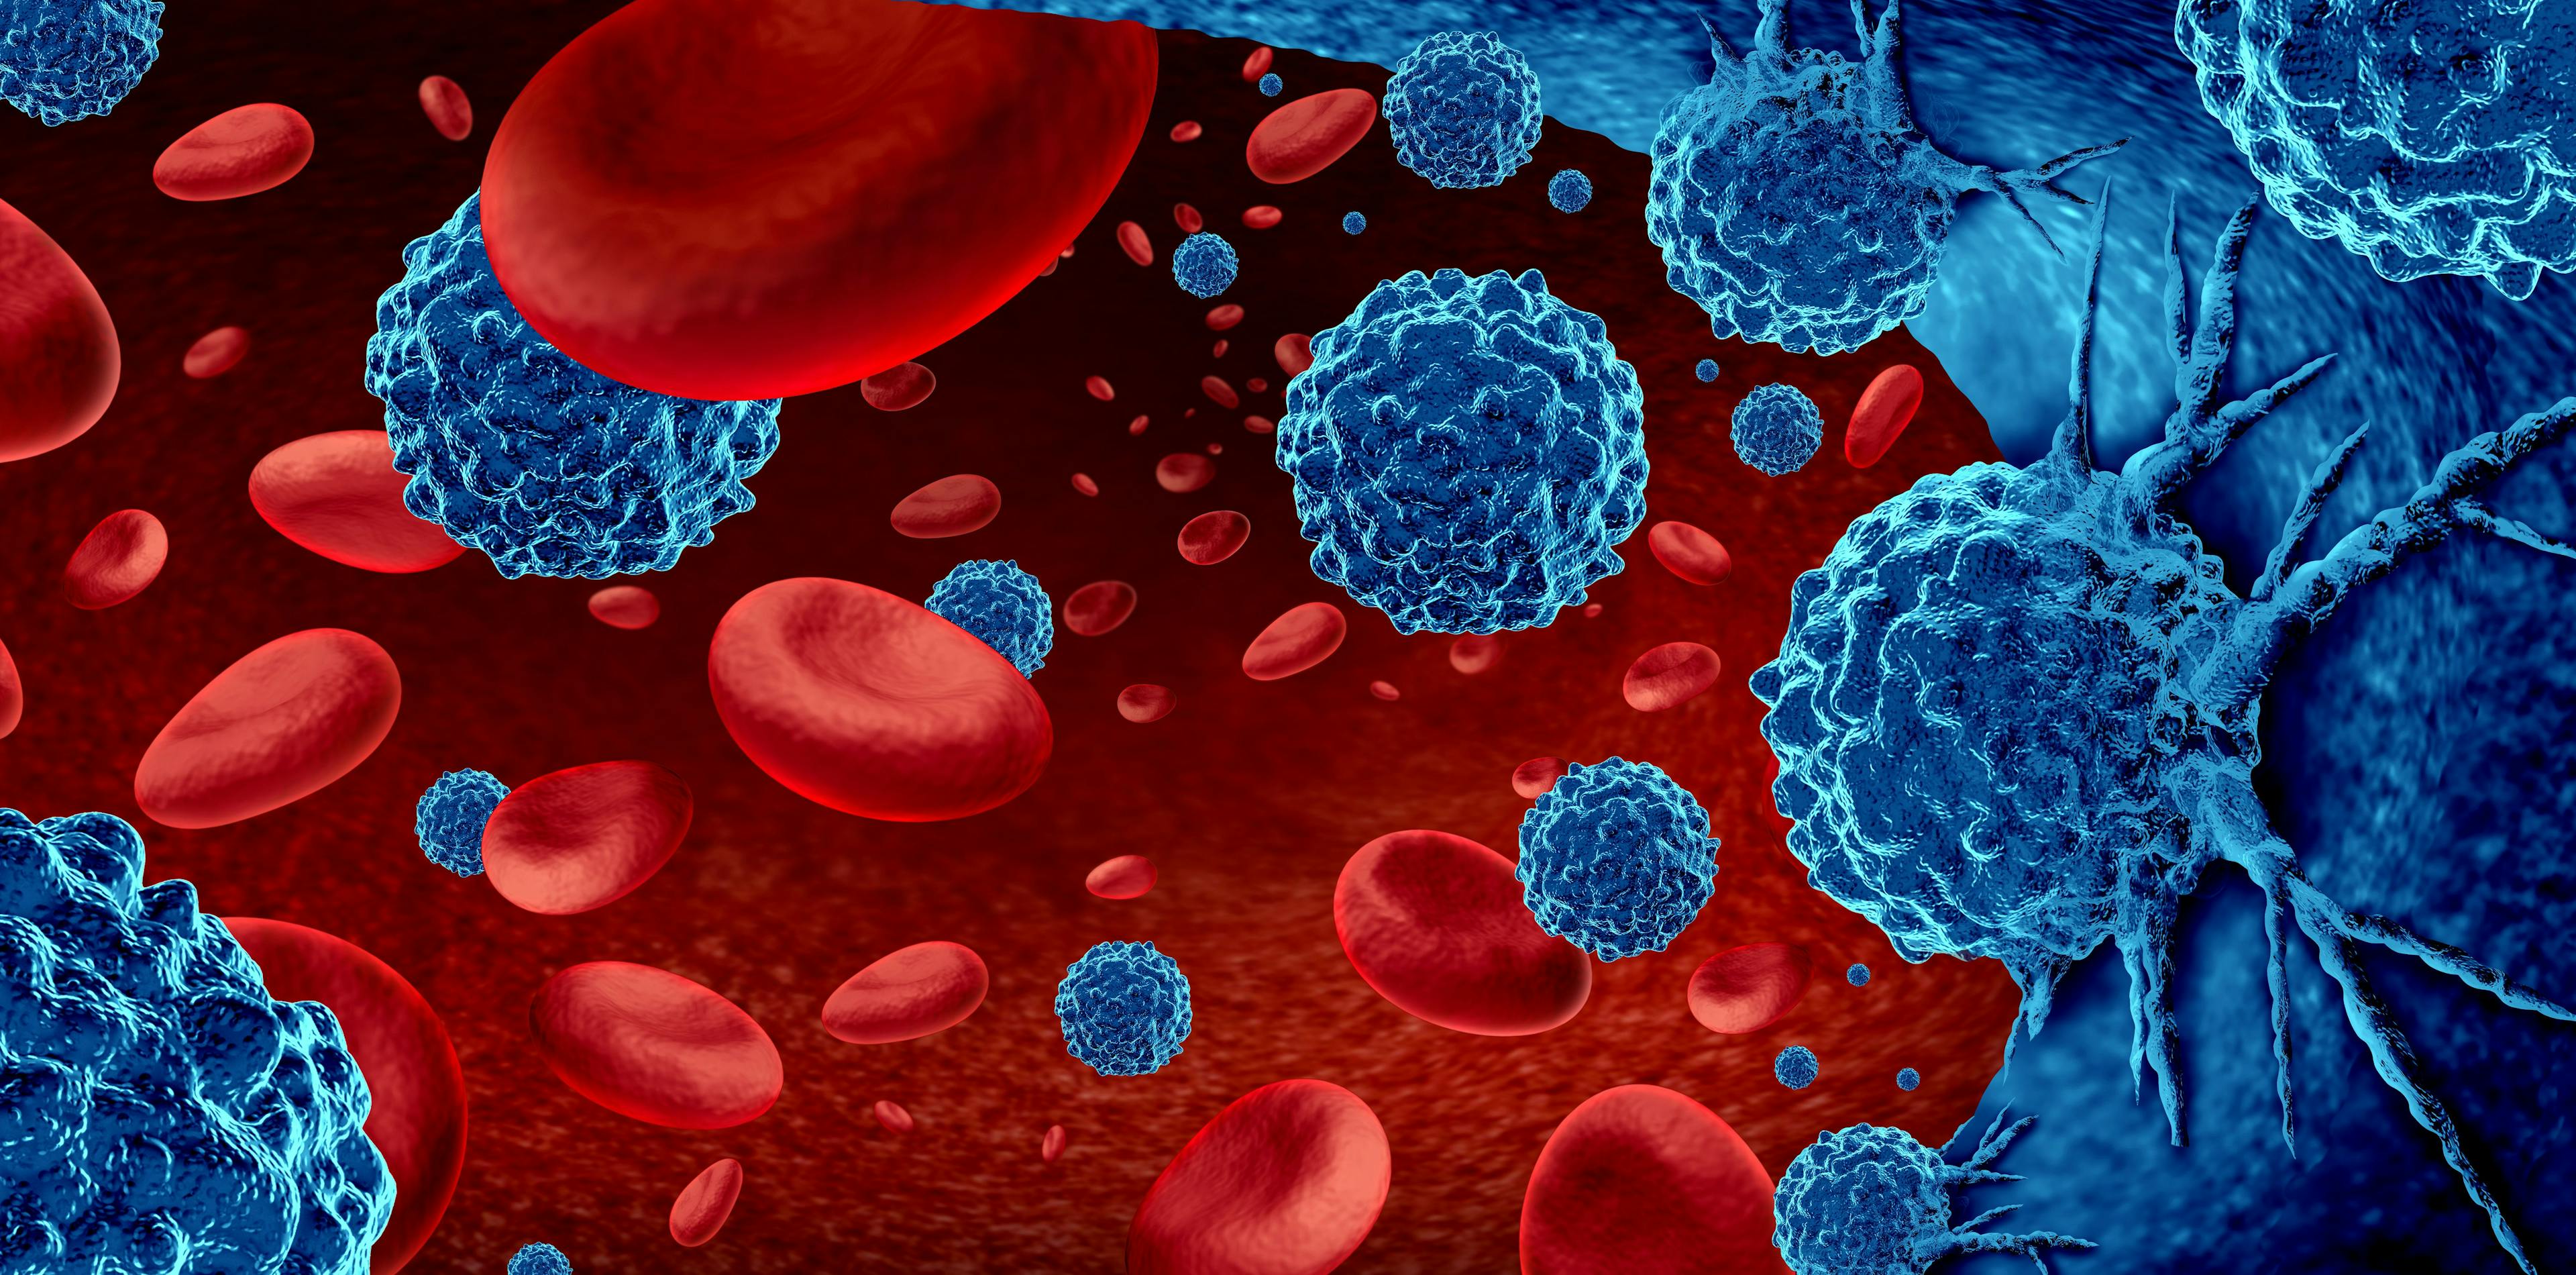 AUTO1 CAR T Therapy Improves EFS in Relapsed/Refractory Acute Lymphoblastic Leukemia